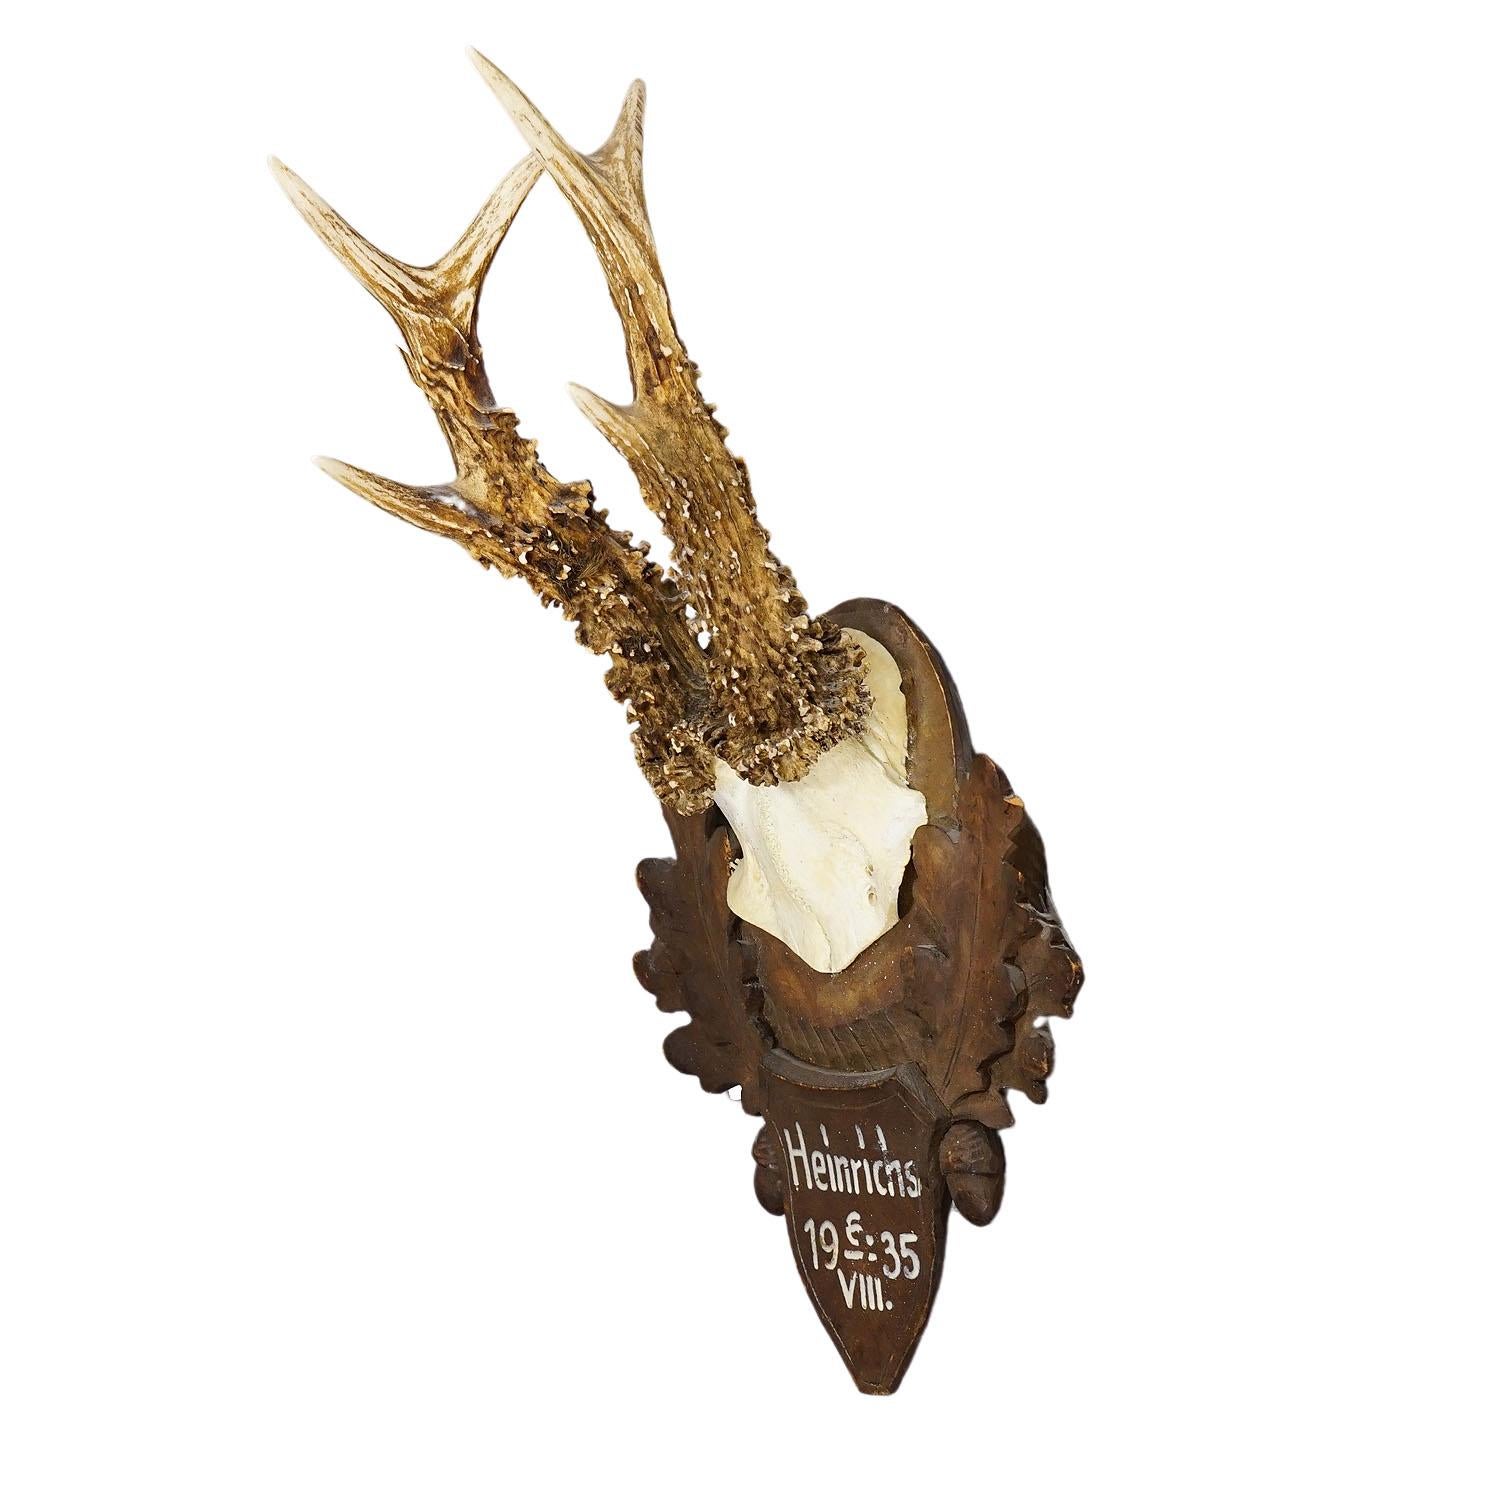 A large antique deer (Capreolus capreolus) trophy on a wooden carved plaque with brown finish. The trophy was shot in 1935. Good condition with hand painted inscription on the plaque.
Trophies are mementos from the hunted game, which are kept by the